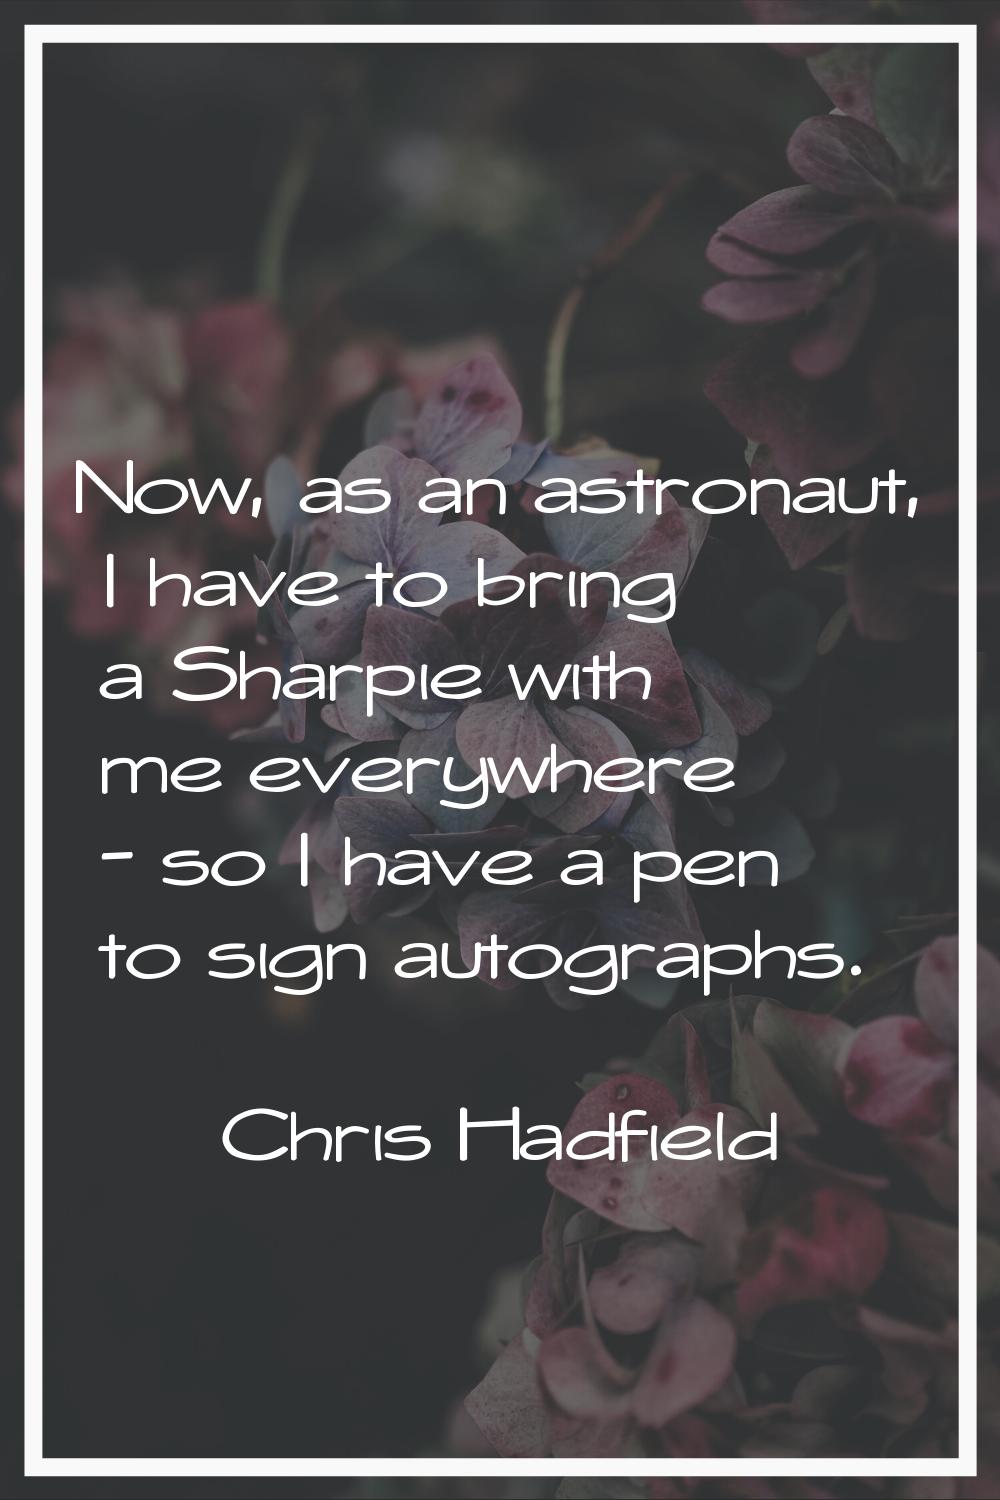 Now, as an astronaut, I have to bring a Sharpie with me everywhere - so I have a pen to sign autogr